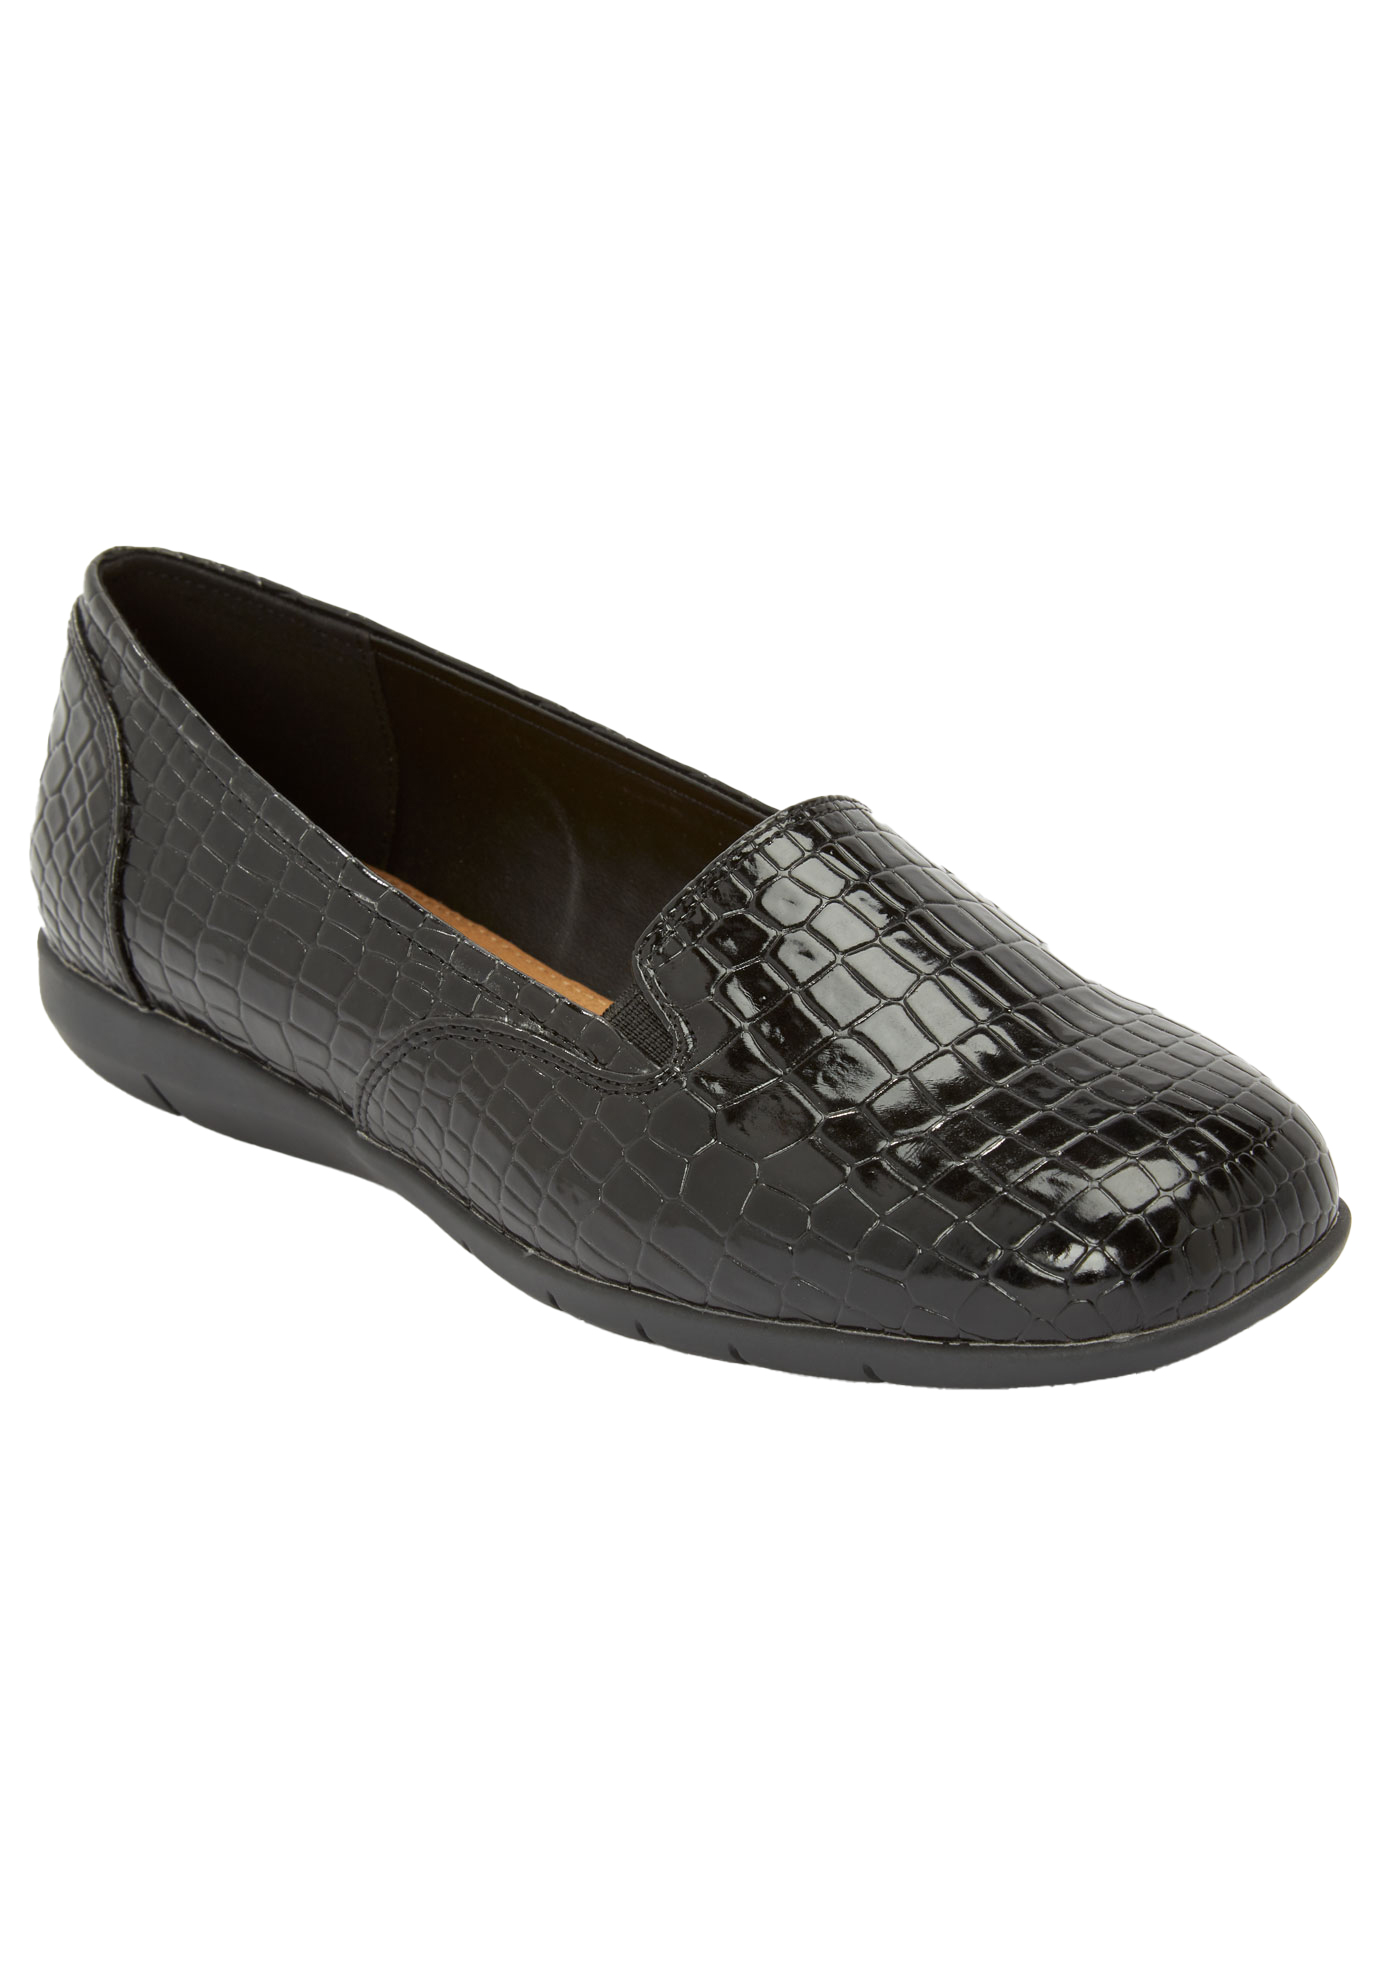 Comfortview Women's Wide Width The Leisa Slip On Flat Shoes - image 1 of 7